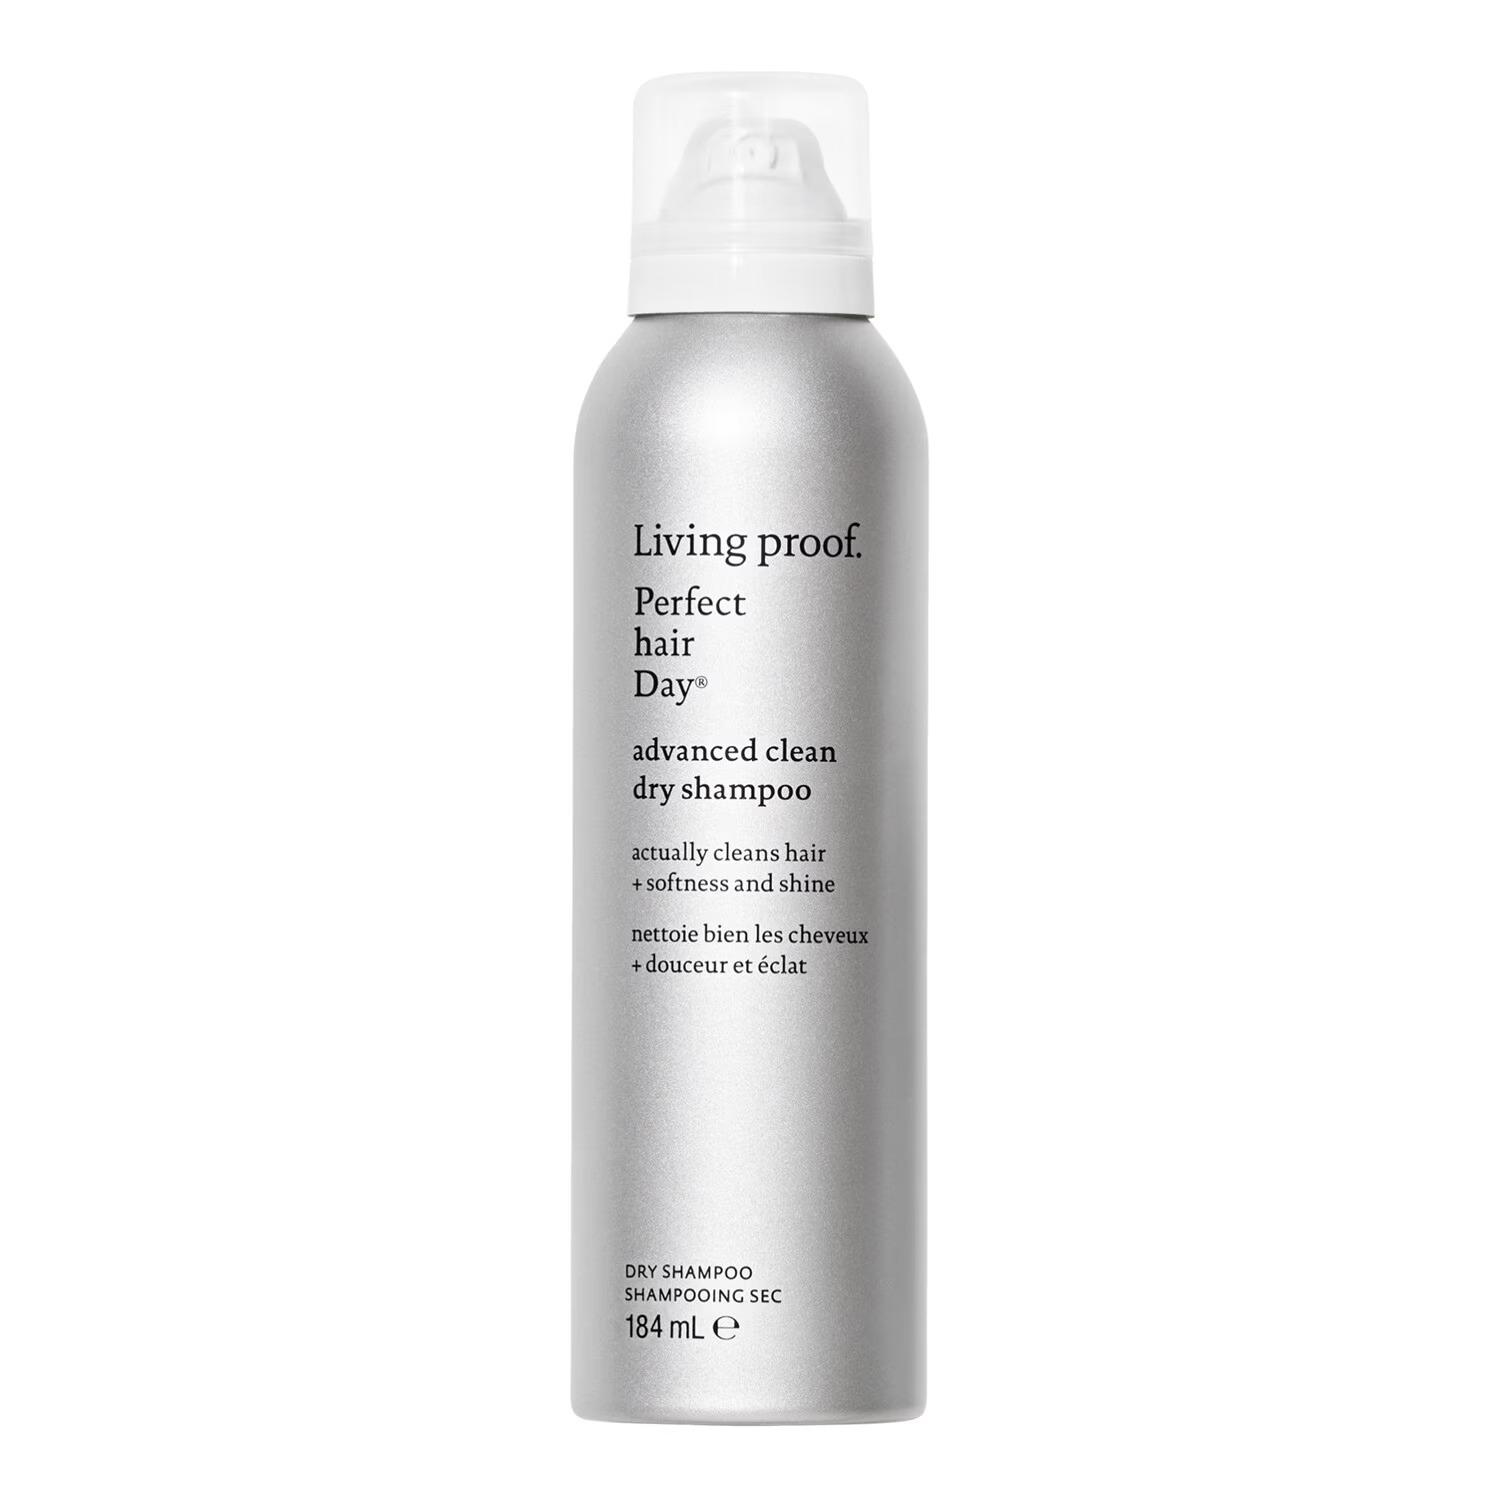 Living Proof Perfect hair Day Advance Clean Dry Shampoo